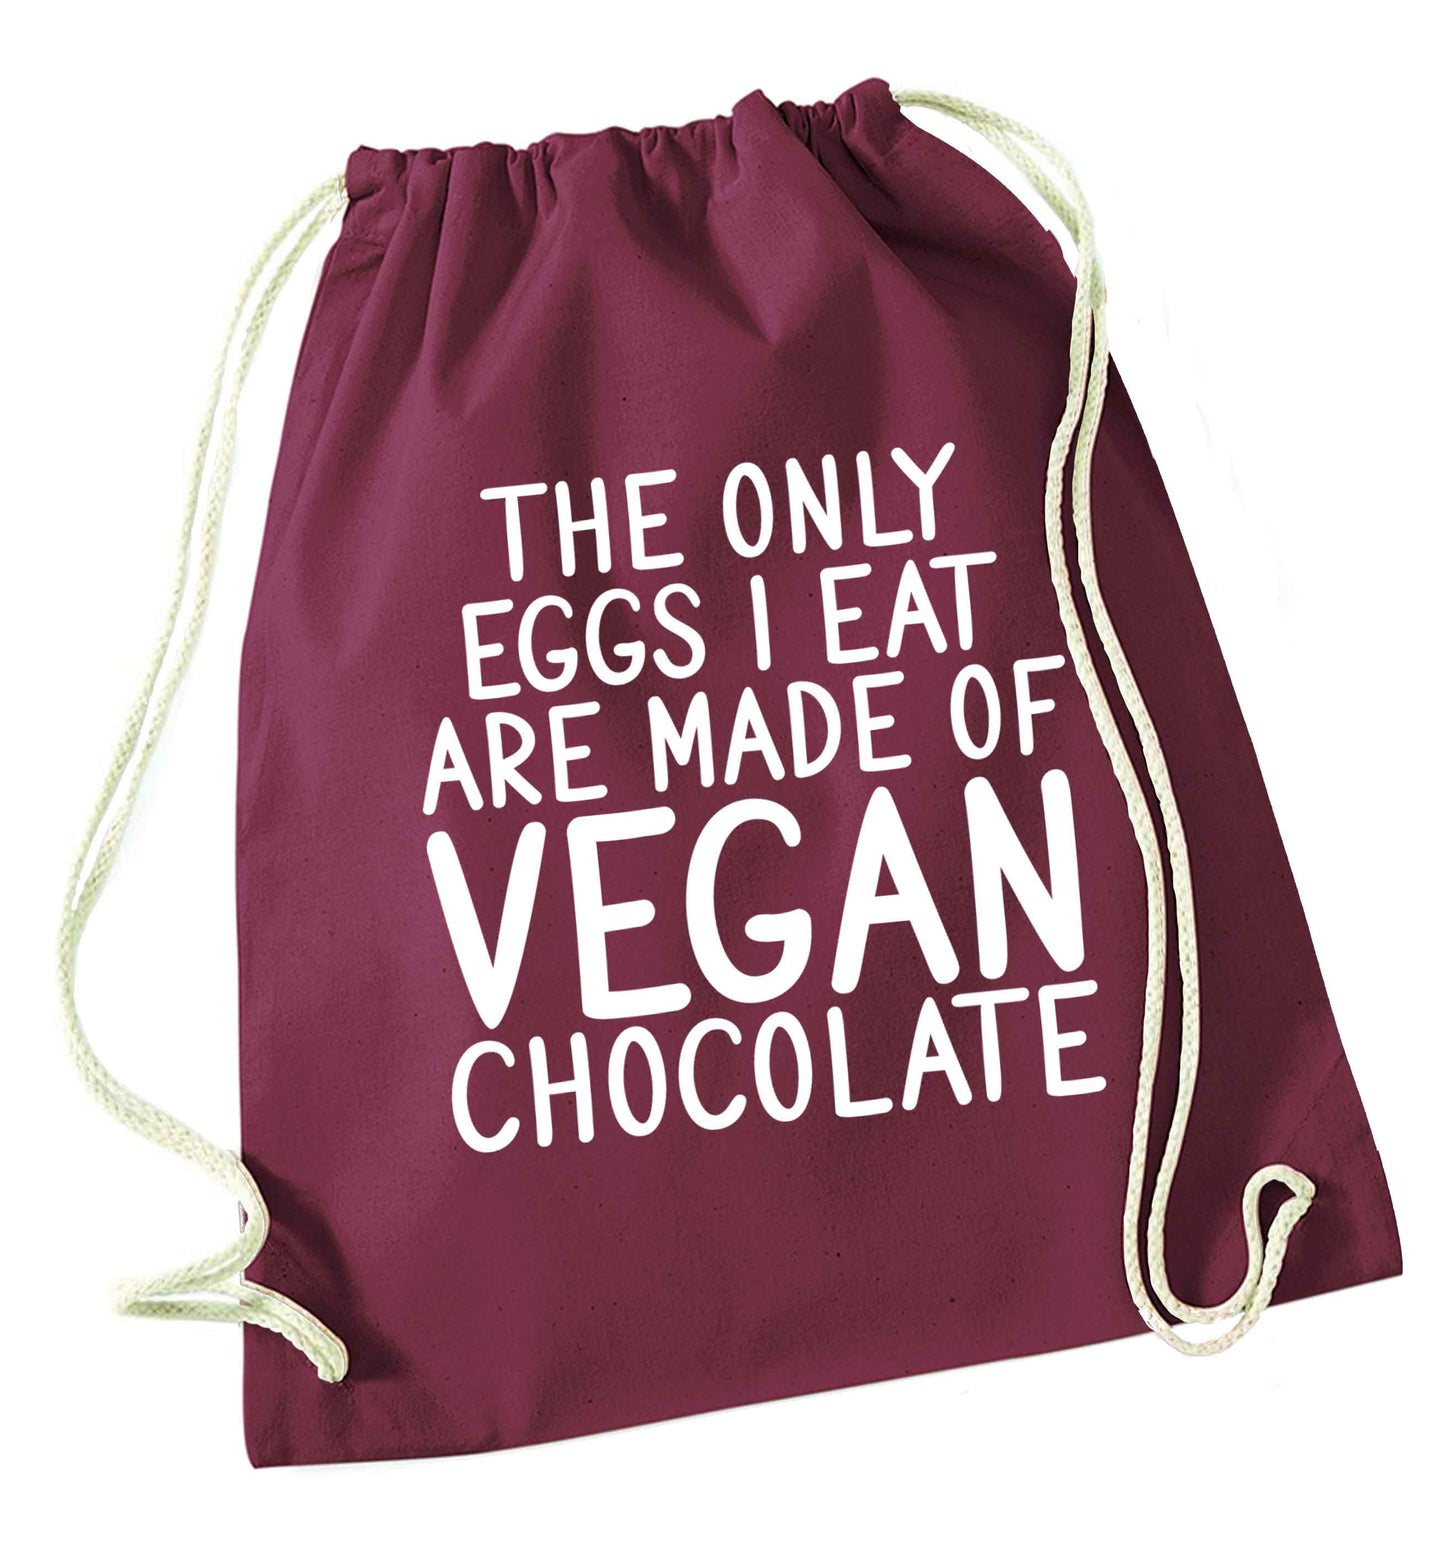 The only eggs I eat are made of vegan chocolate maroon drawstring bag